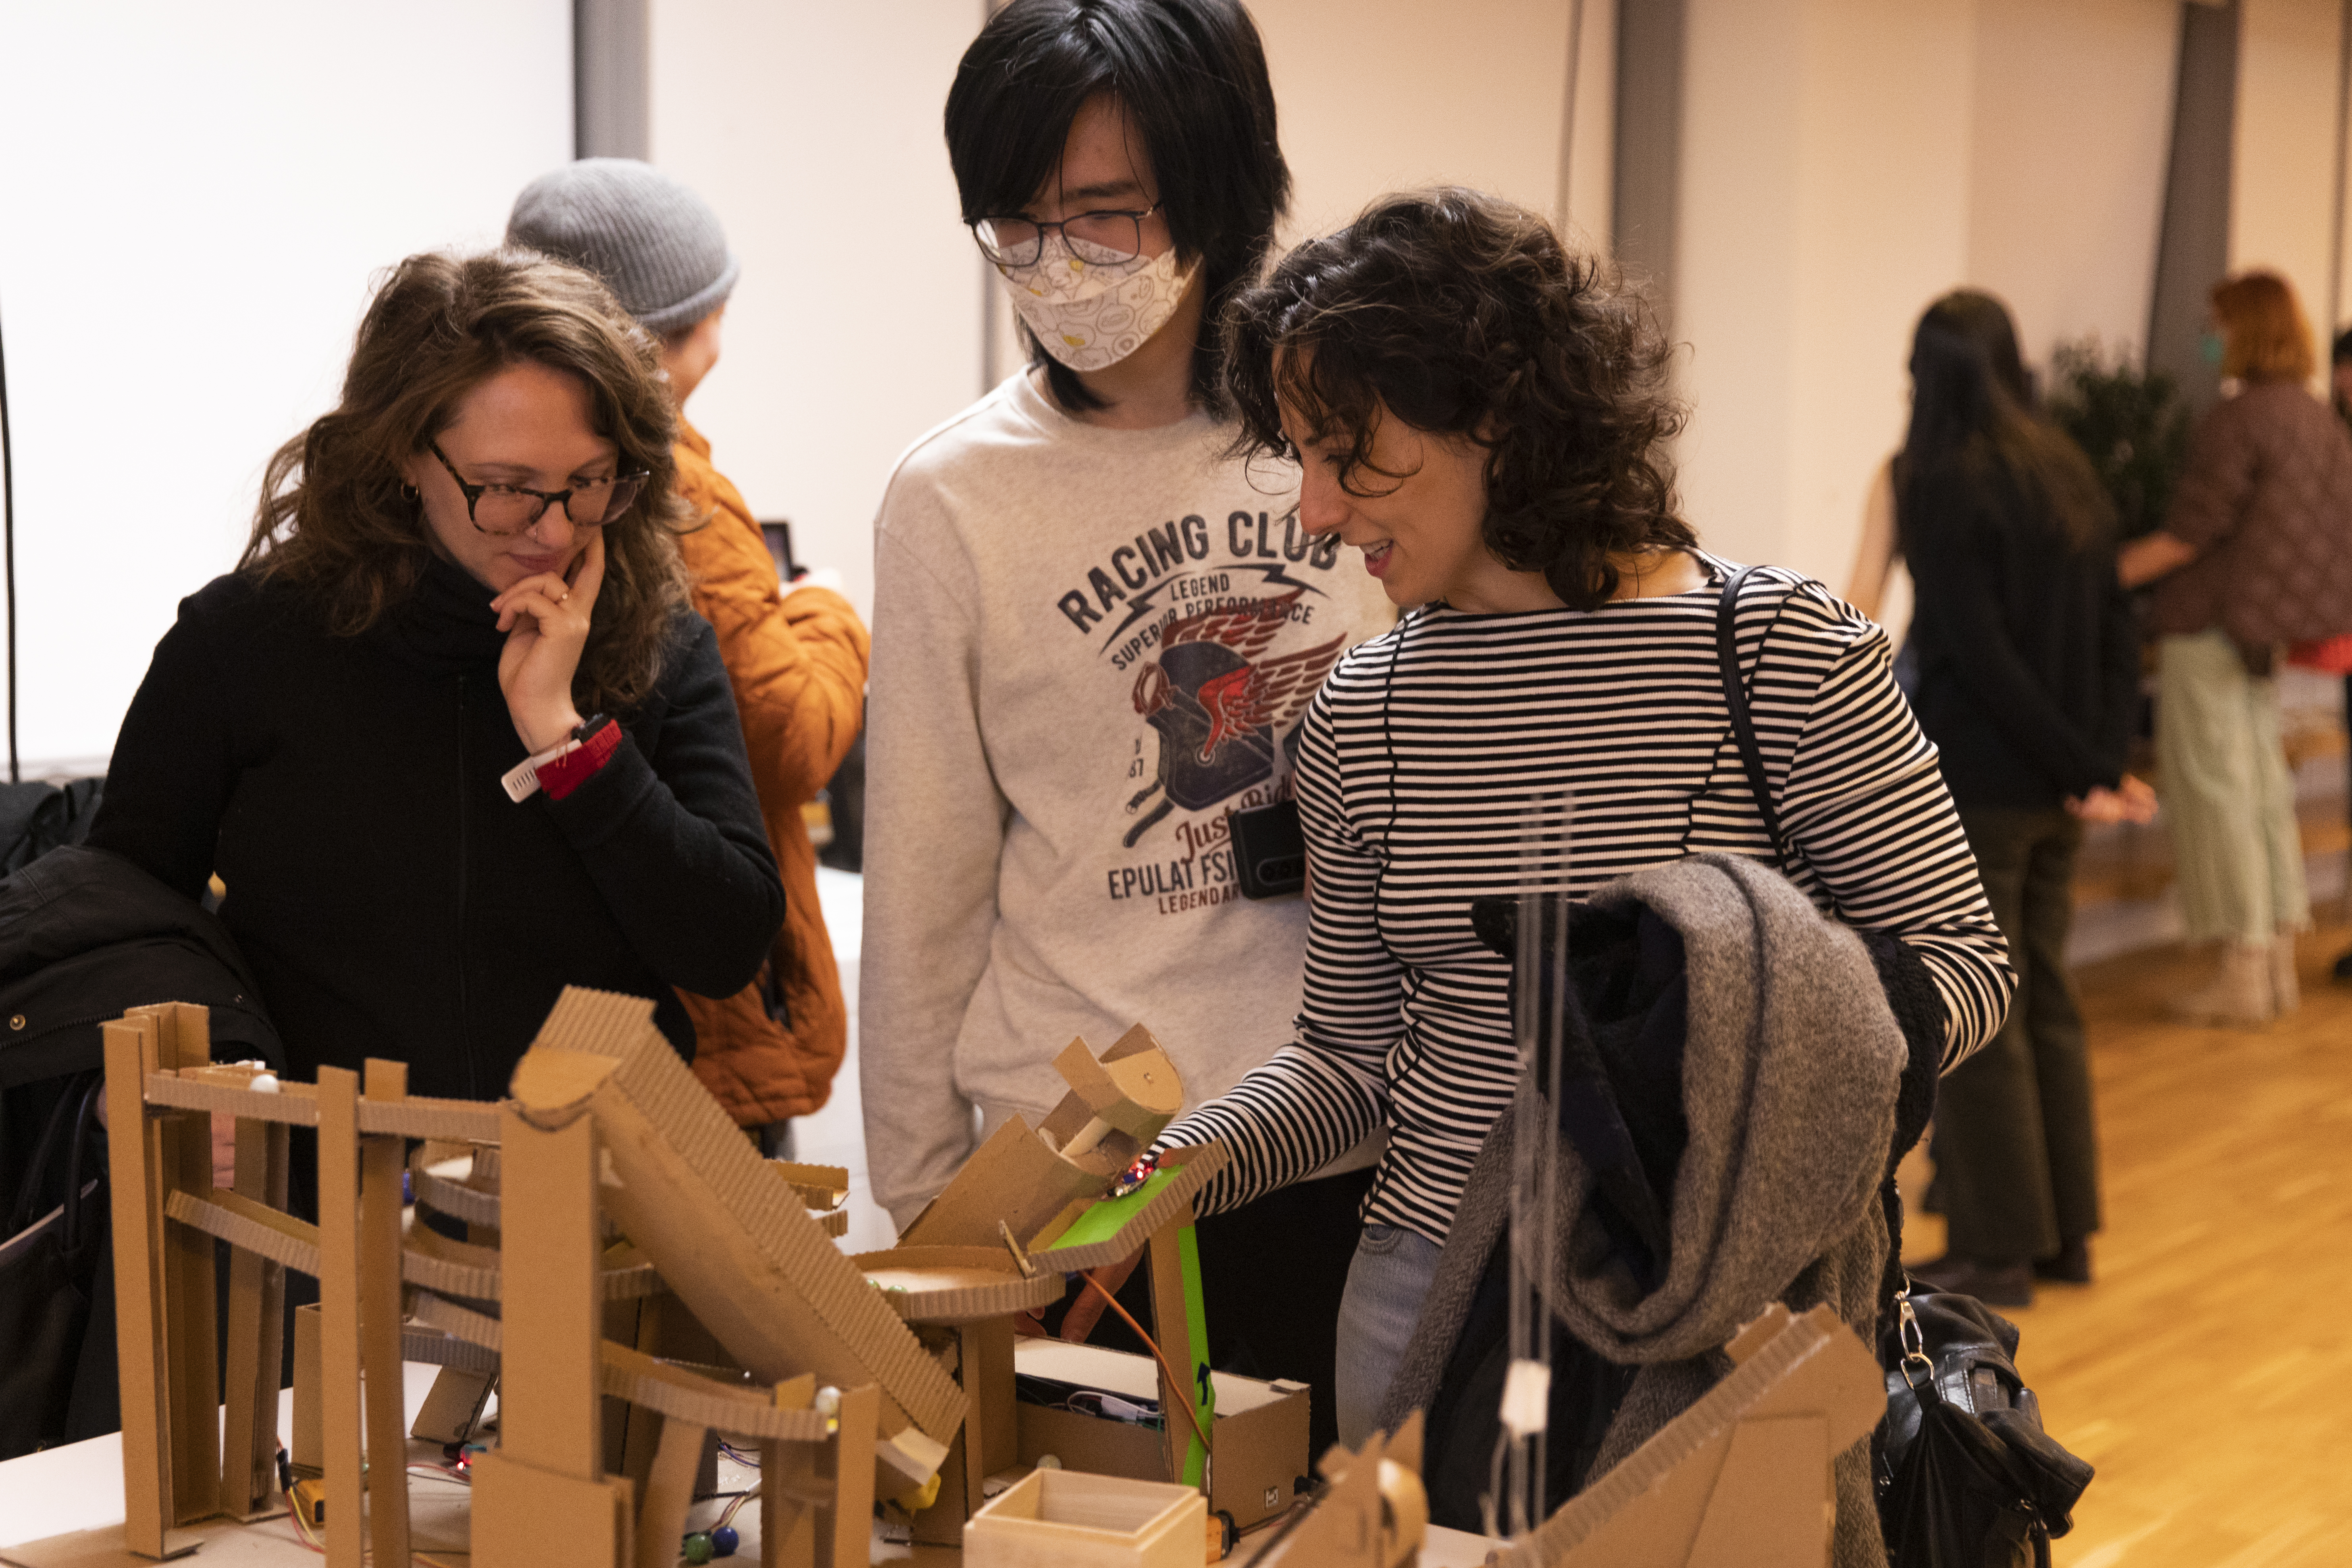 People huddled around a project consisting of platforms made out of cardboard